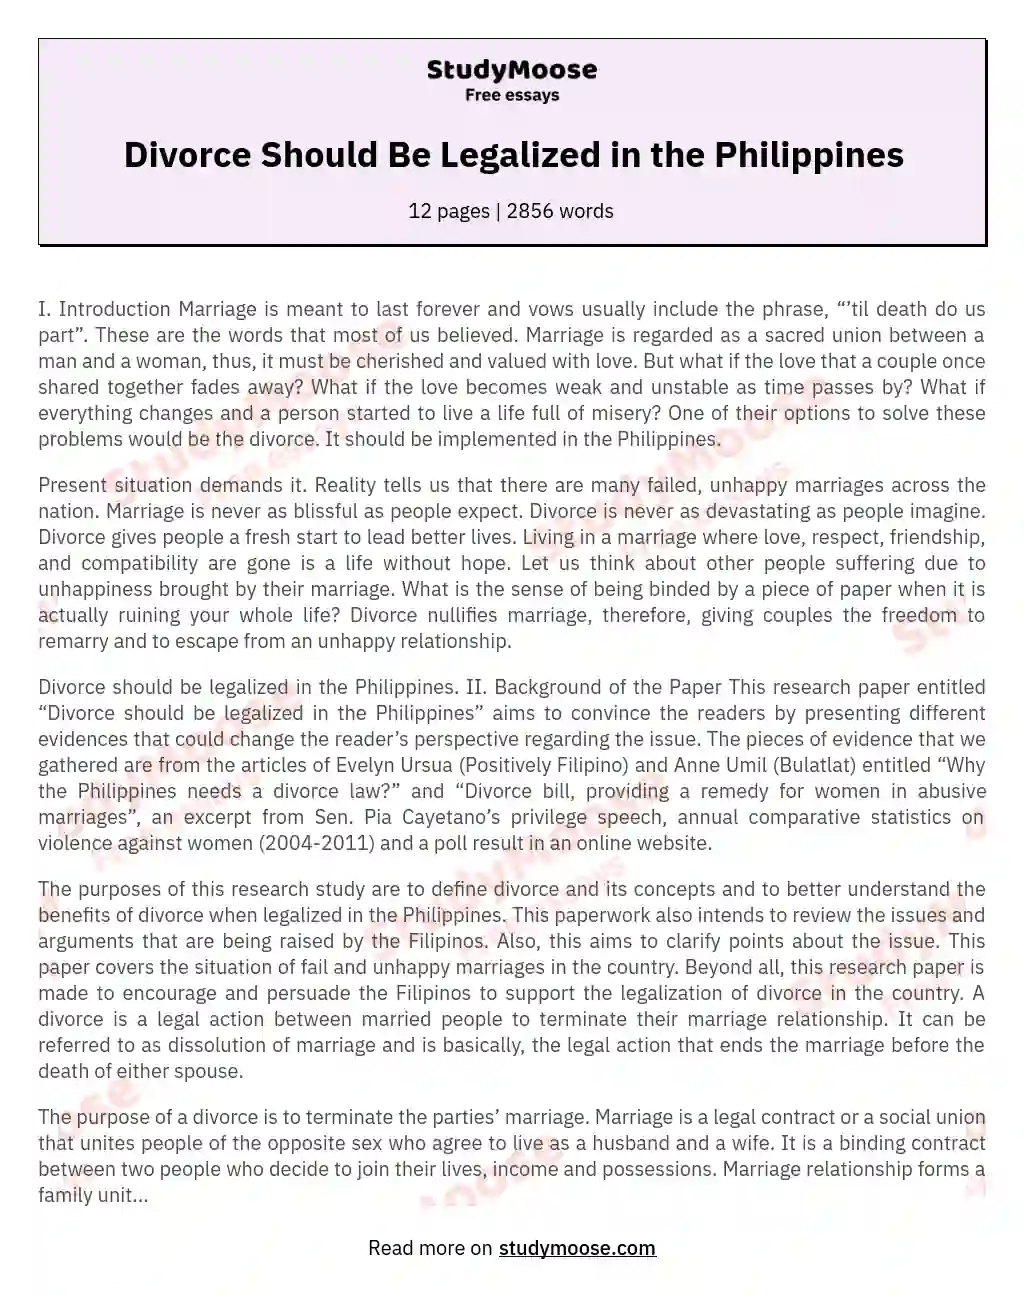 argumentative essay about legalizing divorce in the philippines